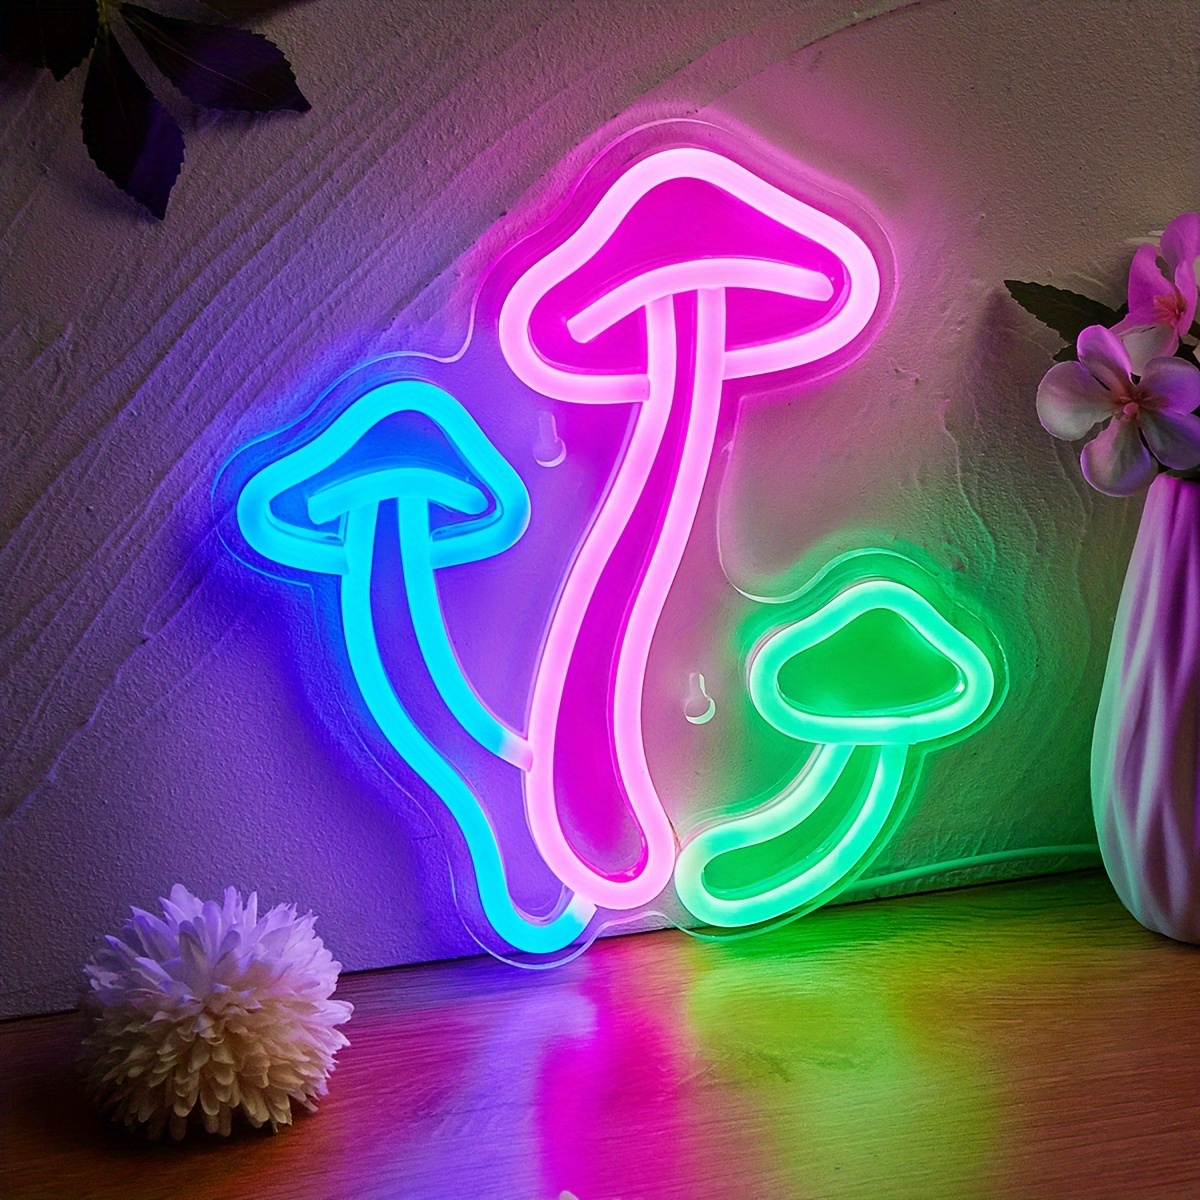 

Led Neon Mushroom Usb Powered Neon Signs Night Light 3d Wall Art & Game Room Bedroom Party Decor Lamp Signs